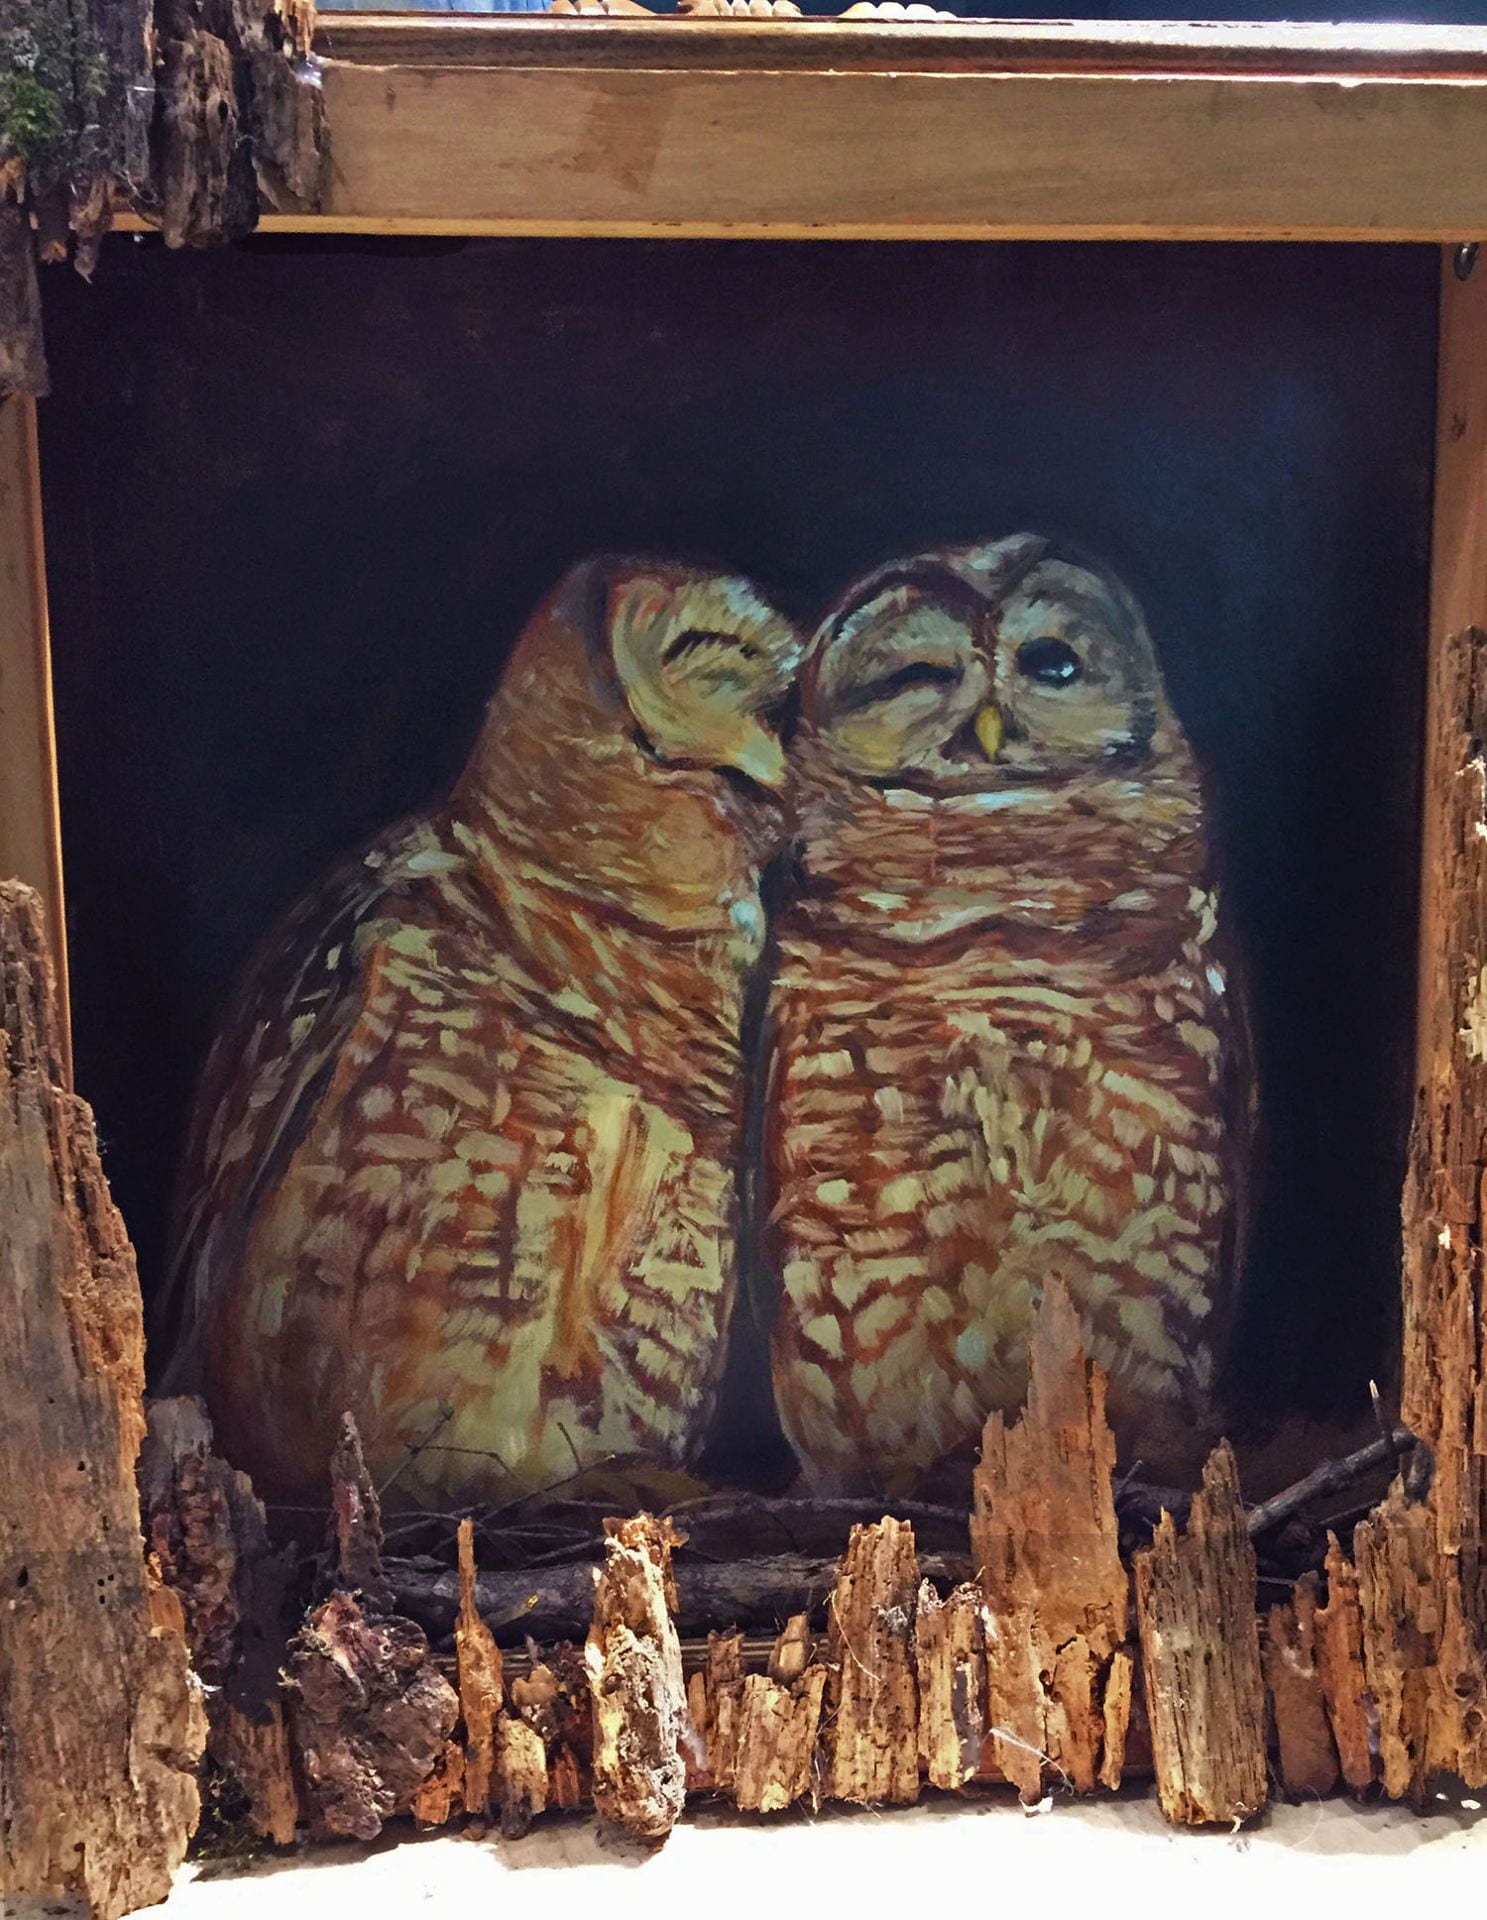 painting of two owls cuddling, framed with rotten chunks of tree.